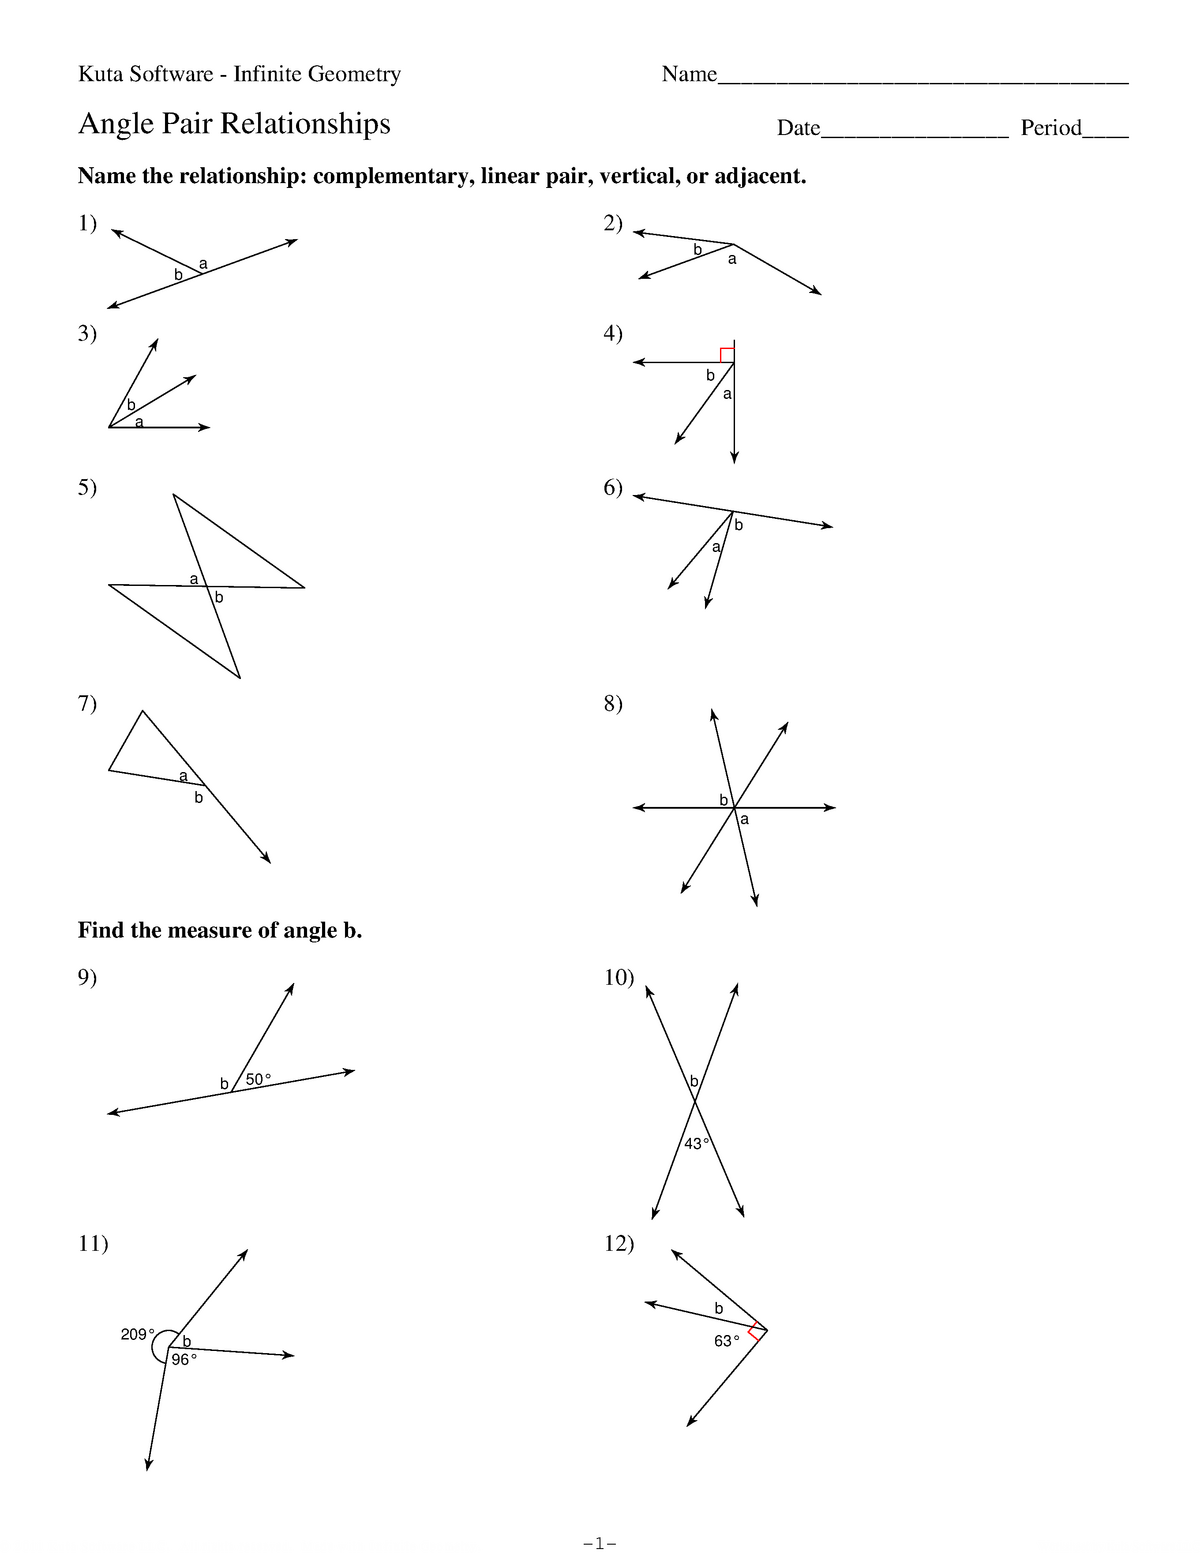 20-Angle Pair Relationships - Bsed Math - MAT - StuDocu Regarding Angle Pair Relationships Worksheet